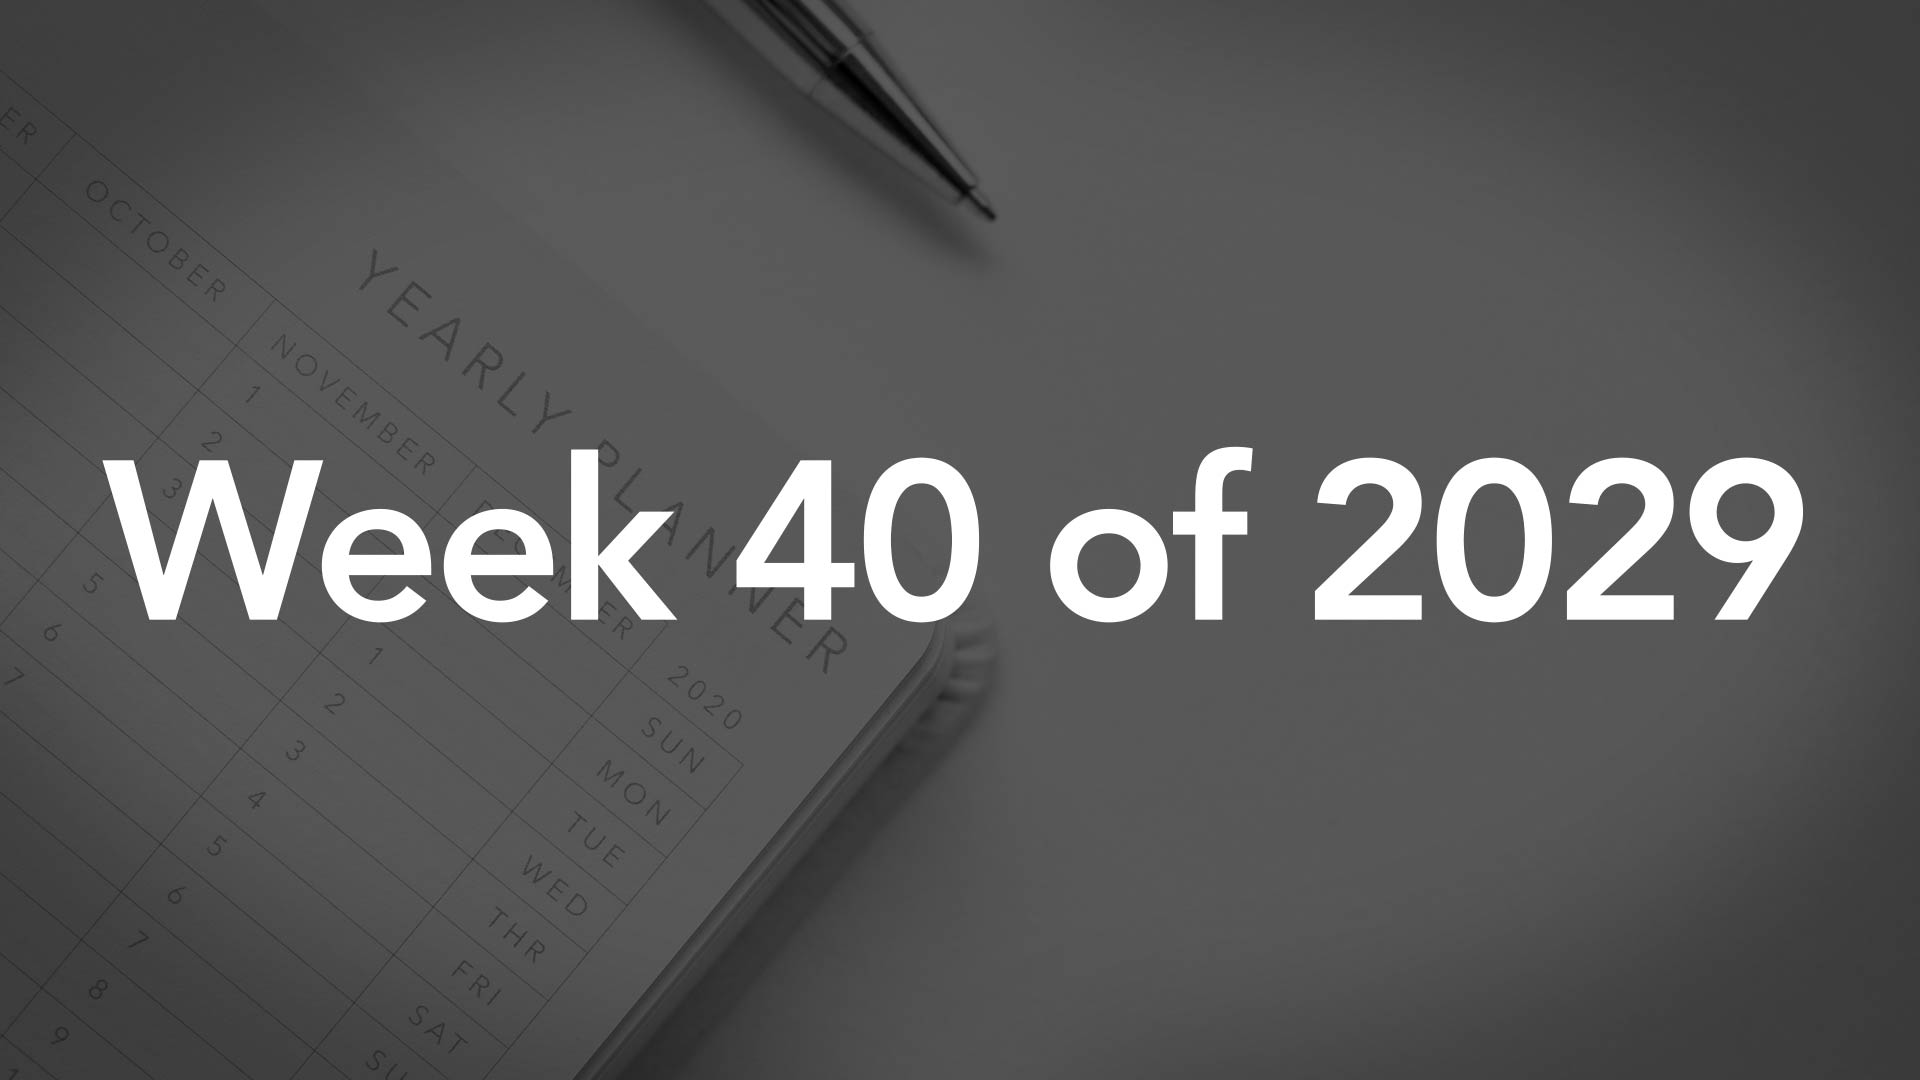 Title Image for Week 40 of 2029